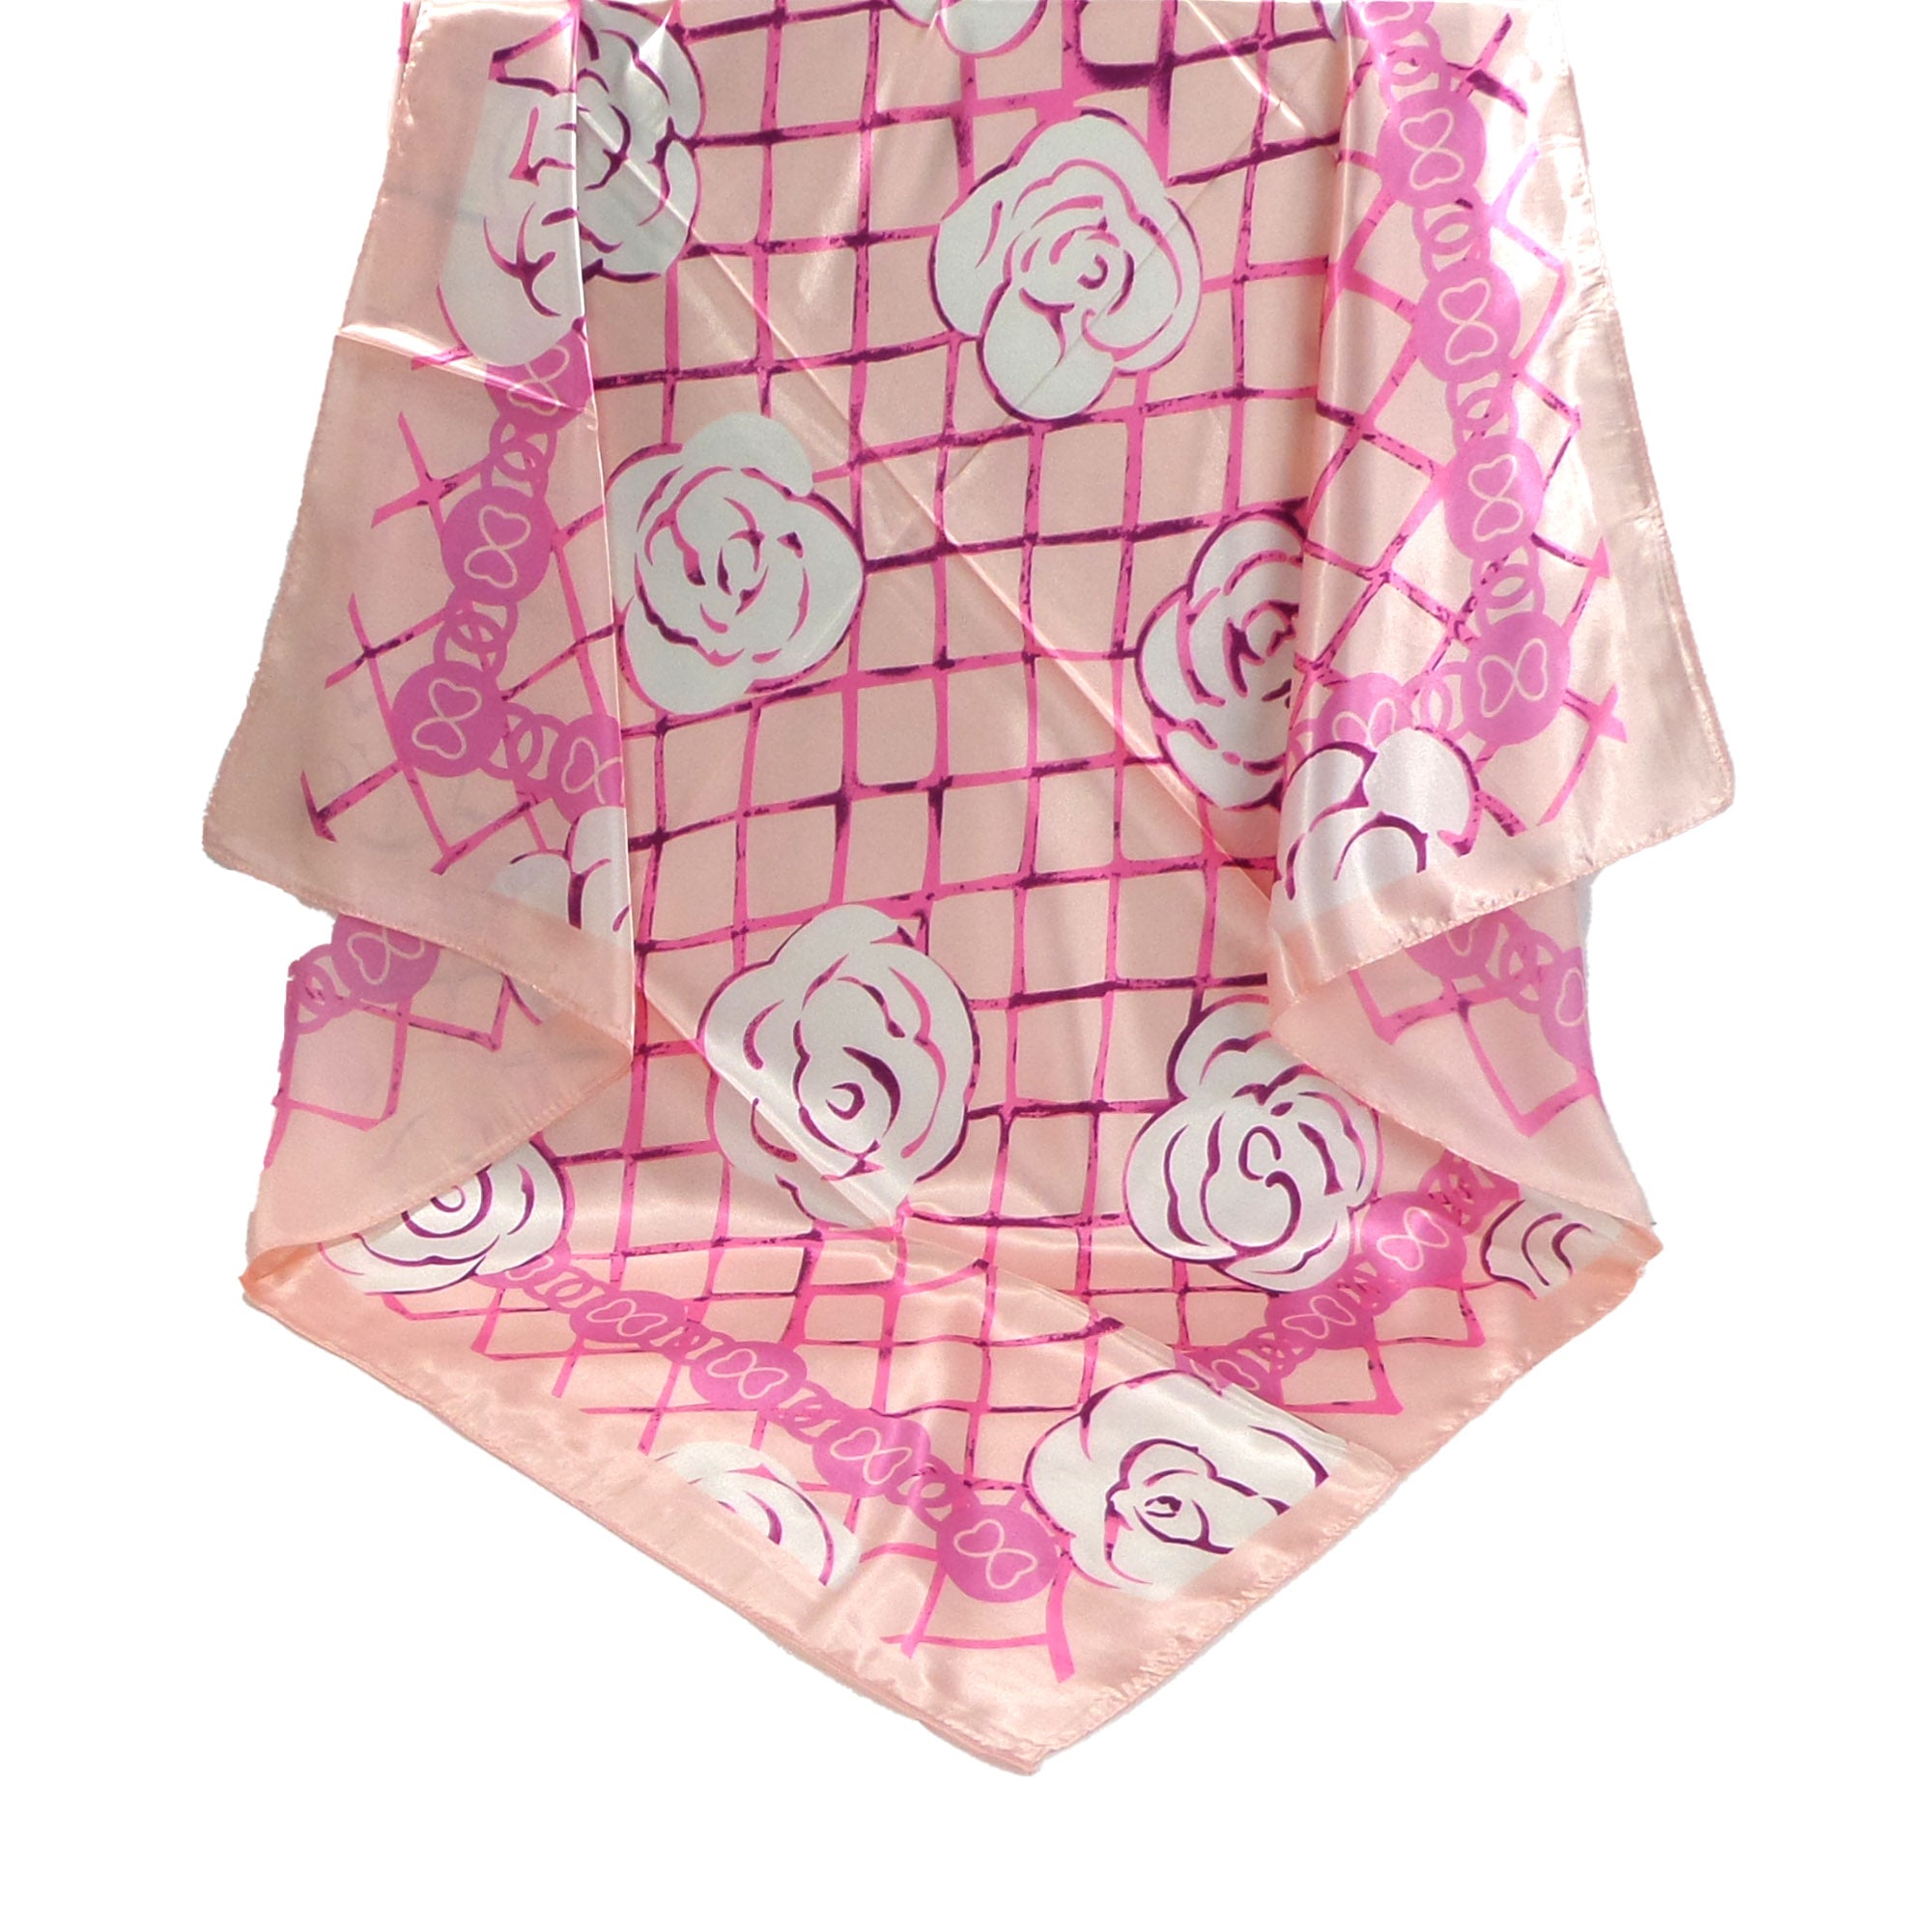 SILKY SCARF ROSE CHECK PATTERN 3721-17 (12PC)